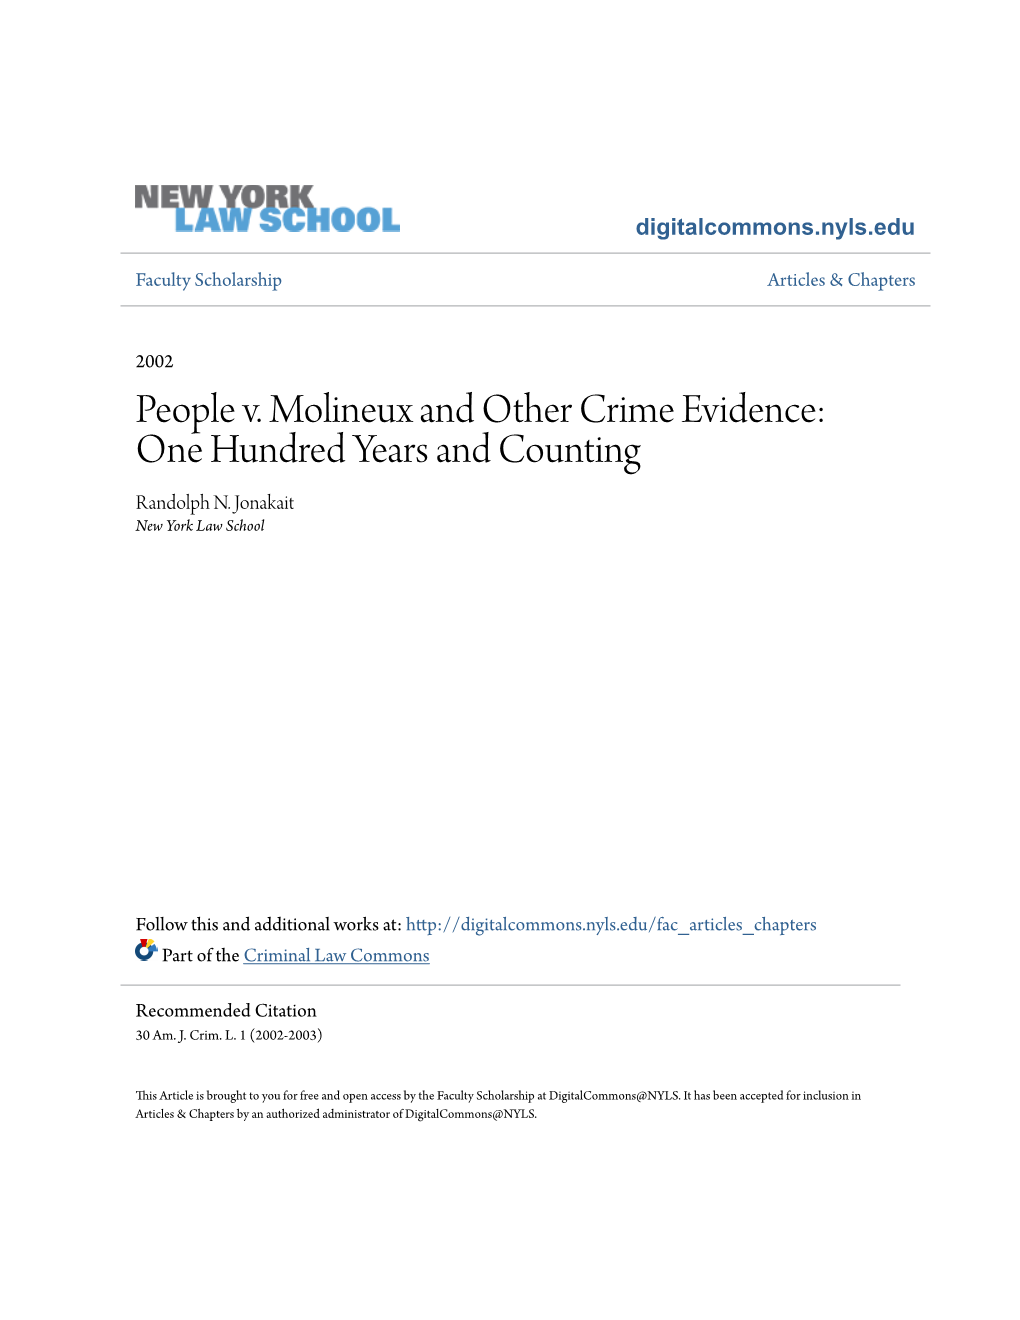 People V. Molineux and Other Crime Evidence: One Hundred Years and Counting Randolph N